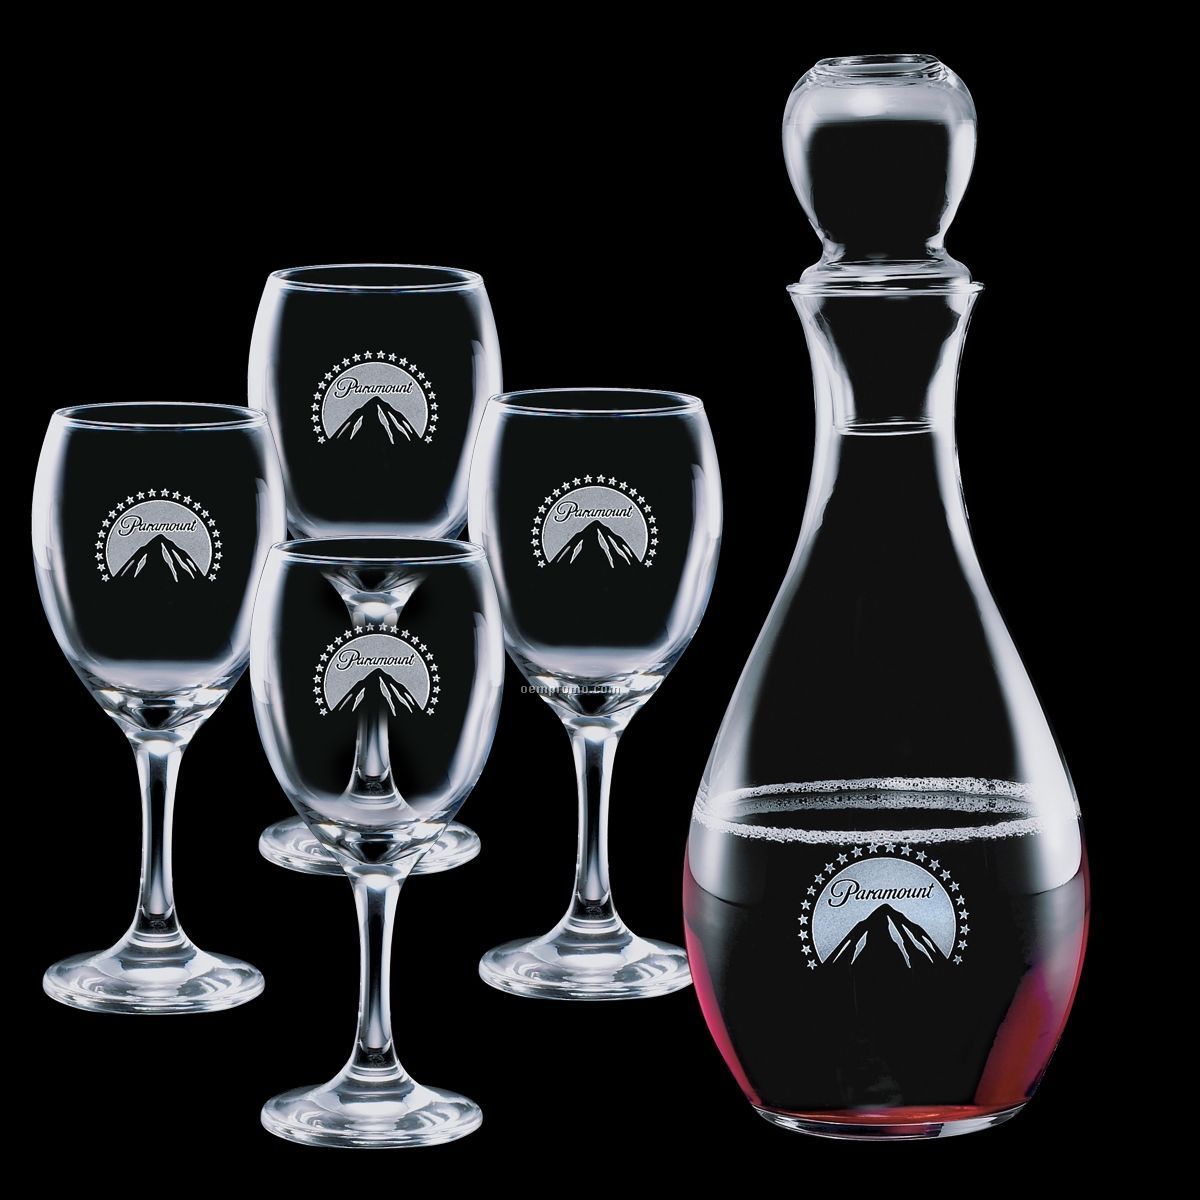 Carberry Decanter And 4 Wine Glasses